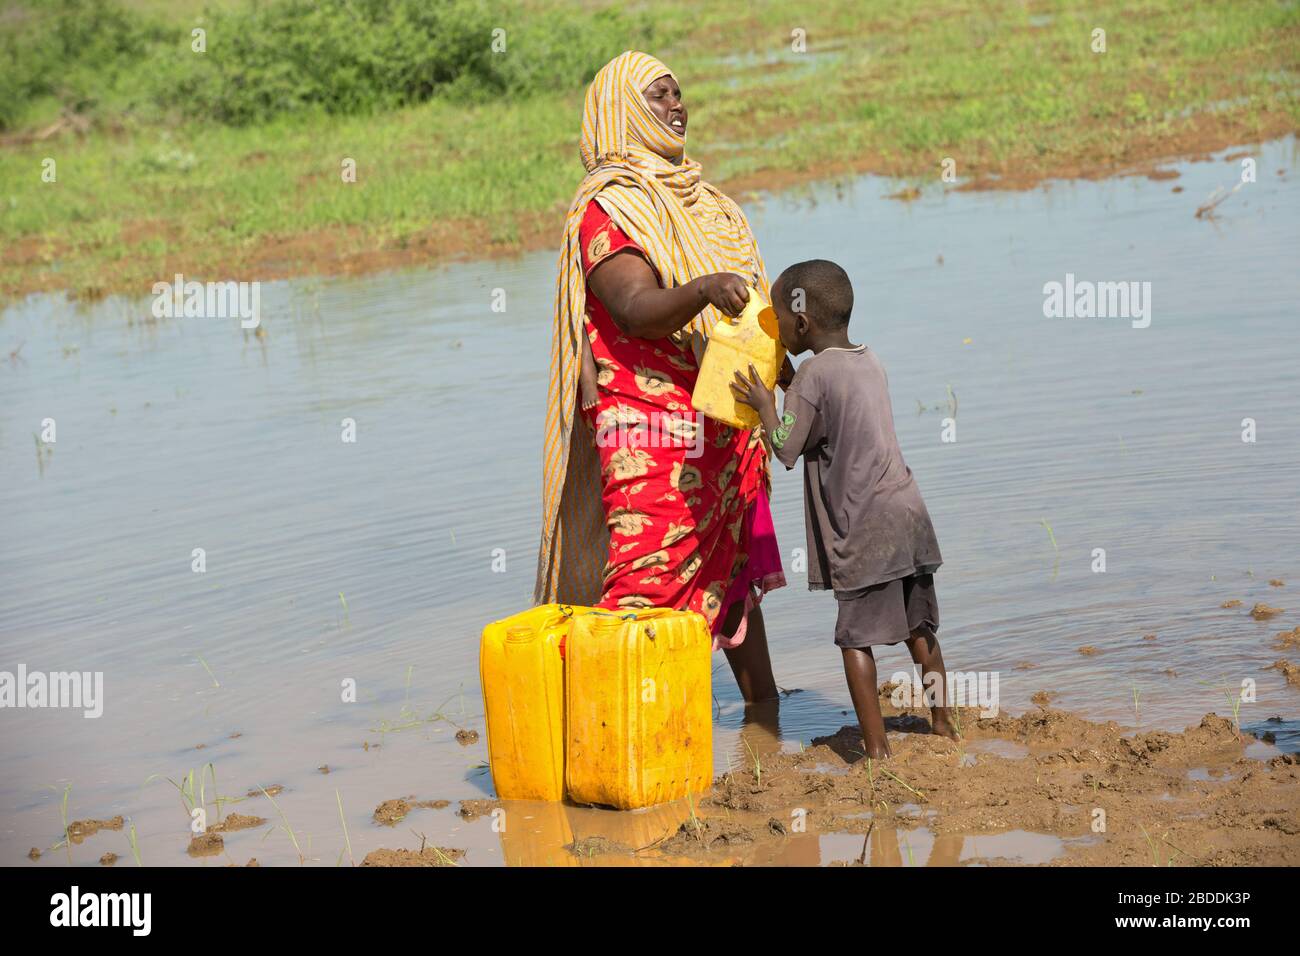 14.11.2019, Gode, Somali Region, Ethiopia - A woman draws water from a waterhole and gives it to one of her children to drink. Project documentation o Stock Photo